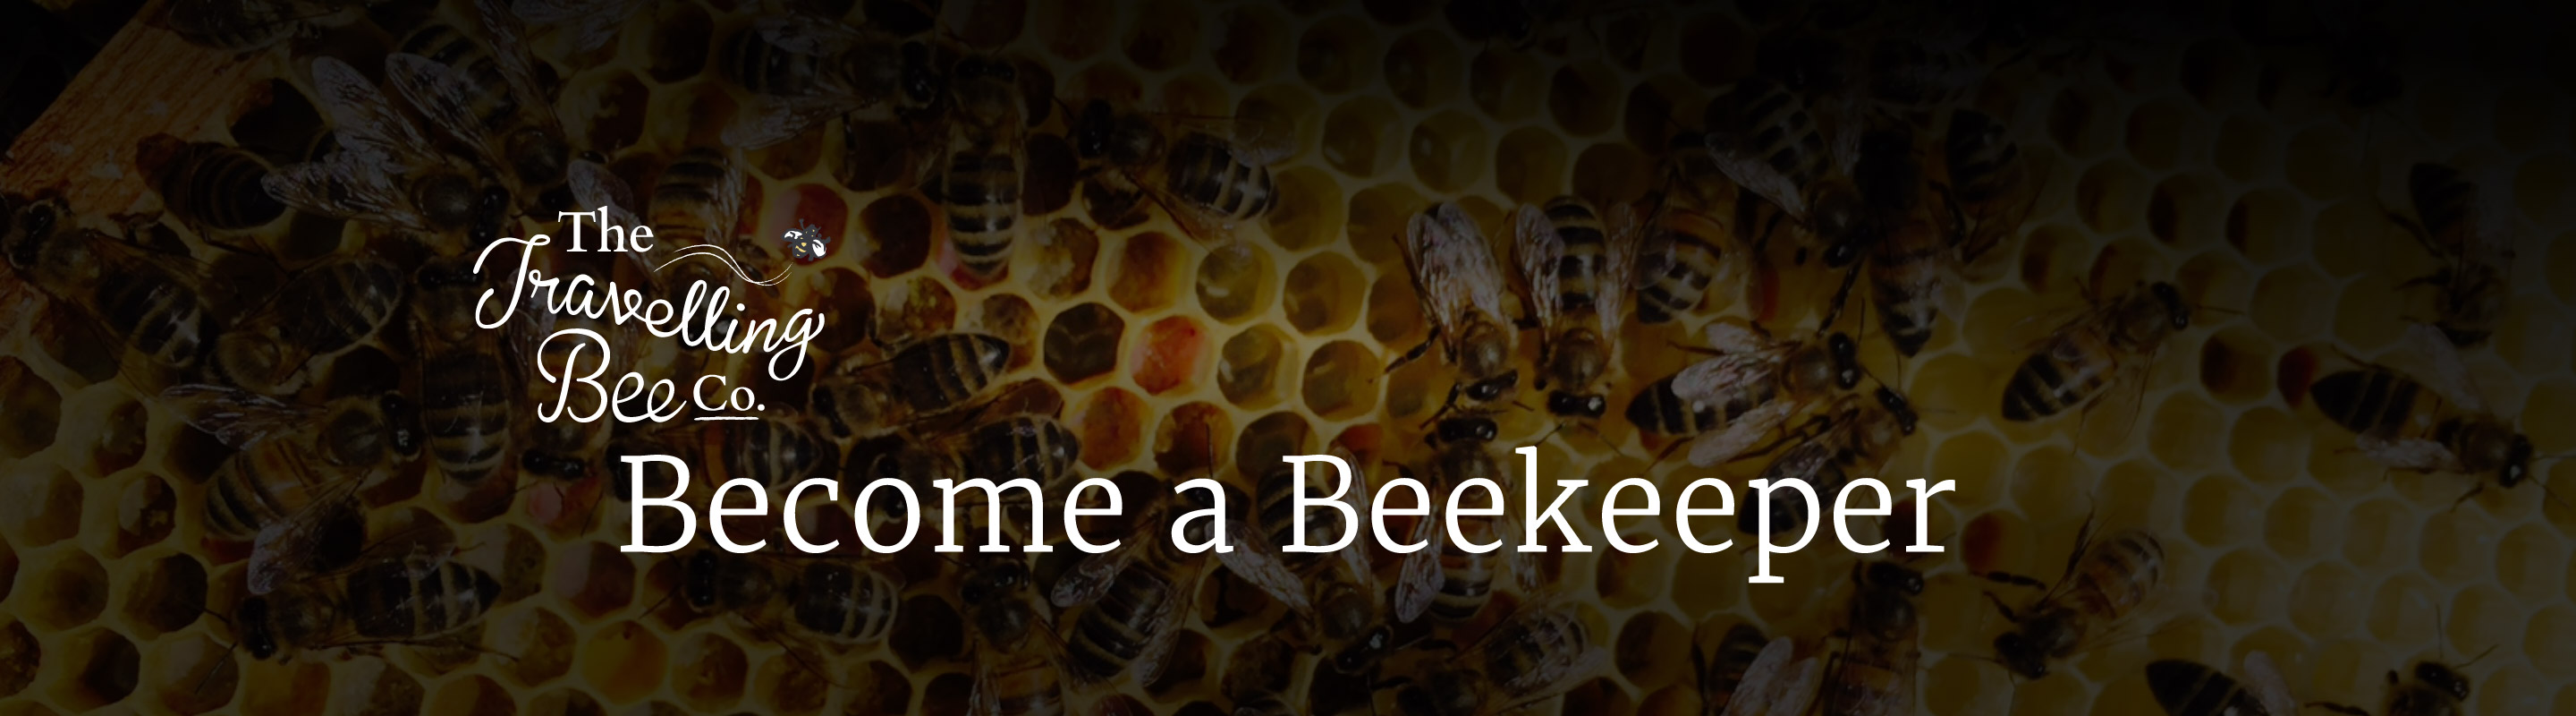 The Travelling Bee Company - Become a Beekeeper